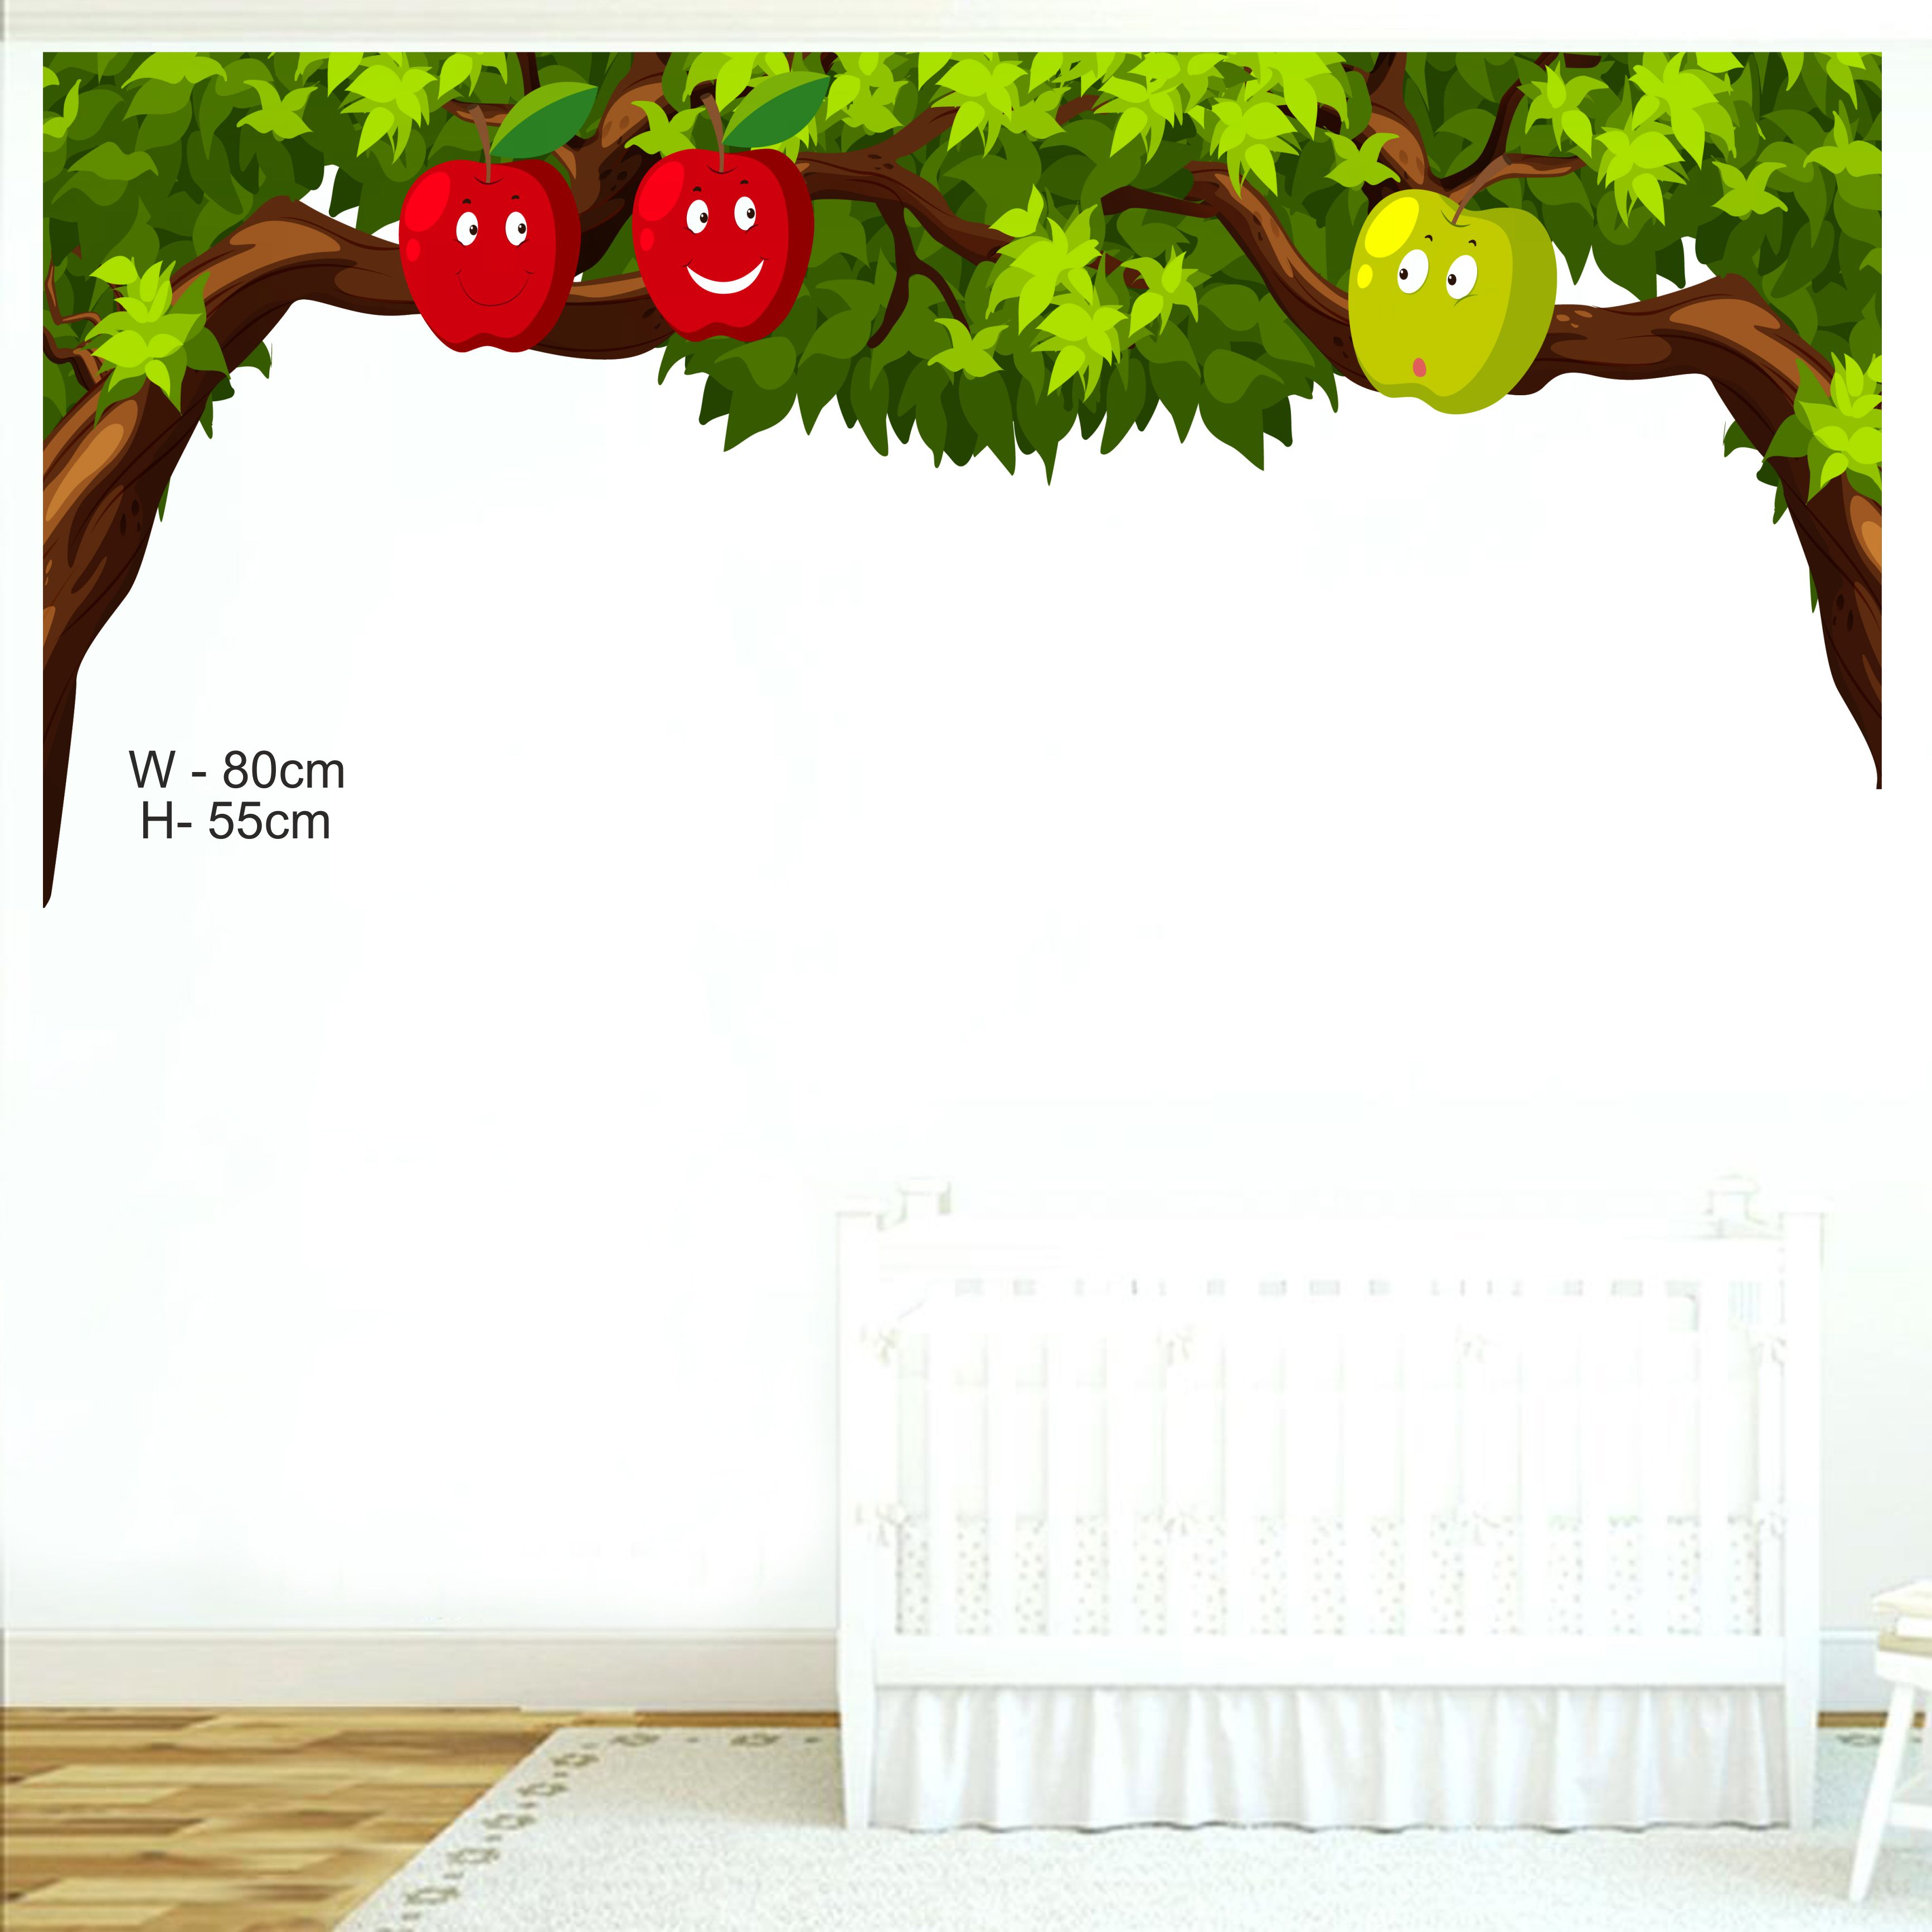 ORKA Nature Wall Decal Sticker 72  